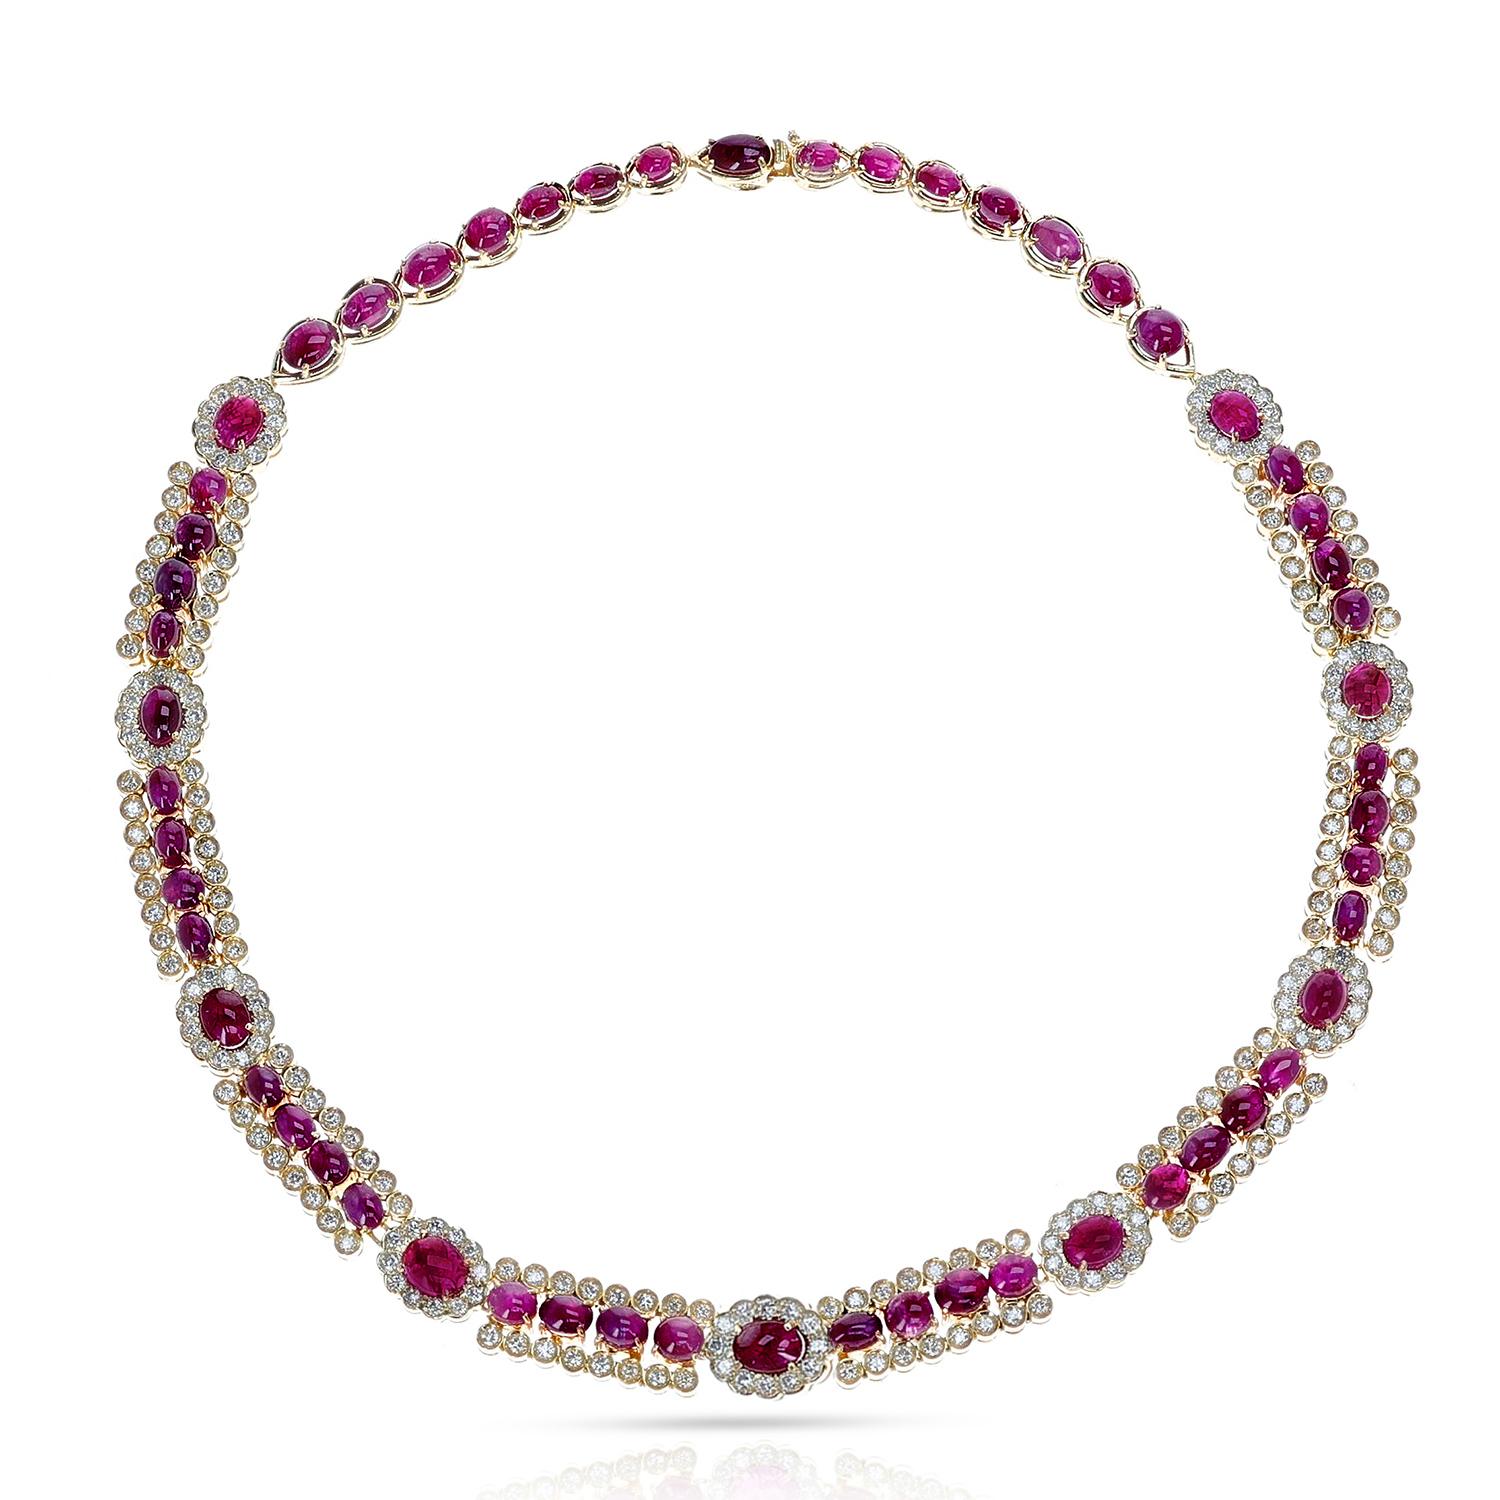 A stunning Unheated Burma Star Ruby Cabochon and Diamond Necklace, part of a set which includes earrings and two pendants. Please contact us for more information on the set. Length: 16.75